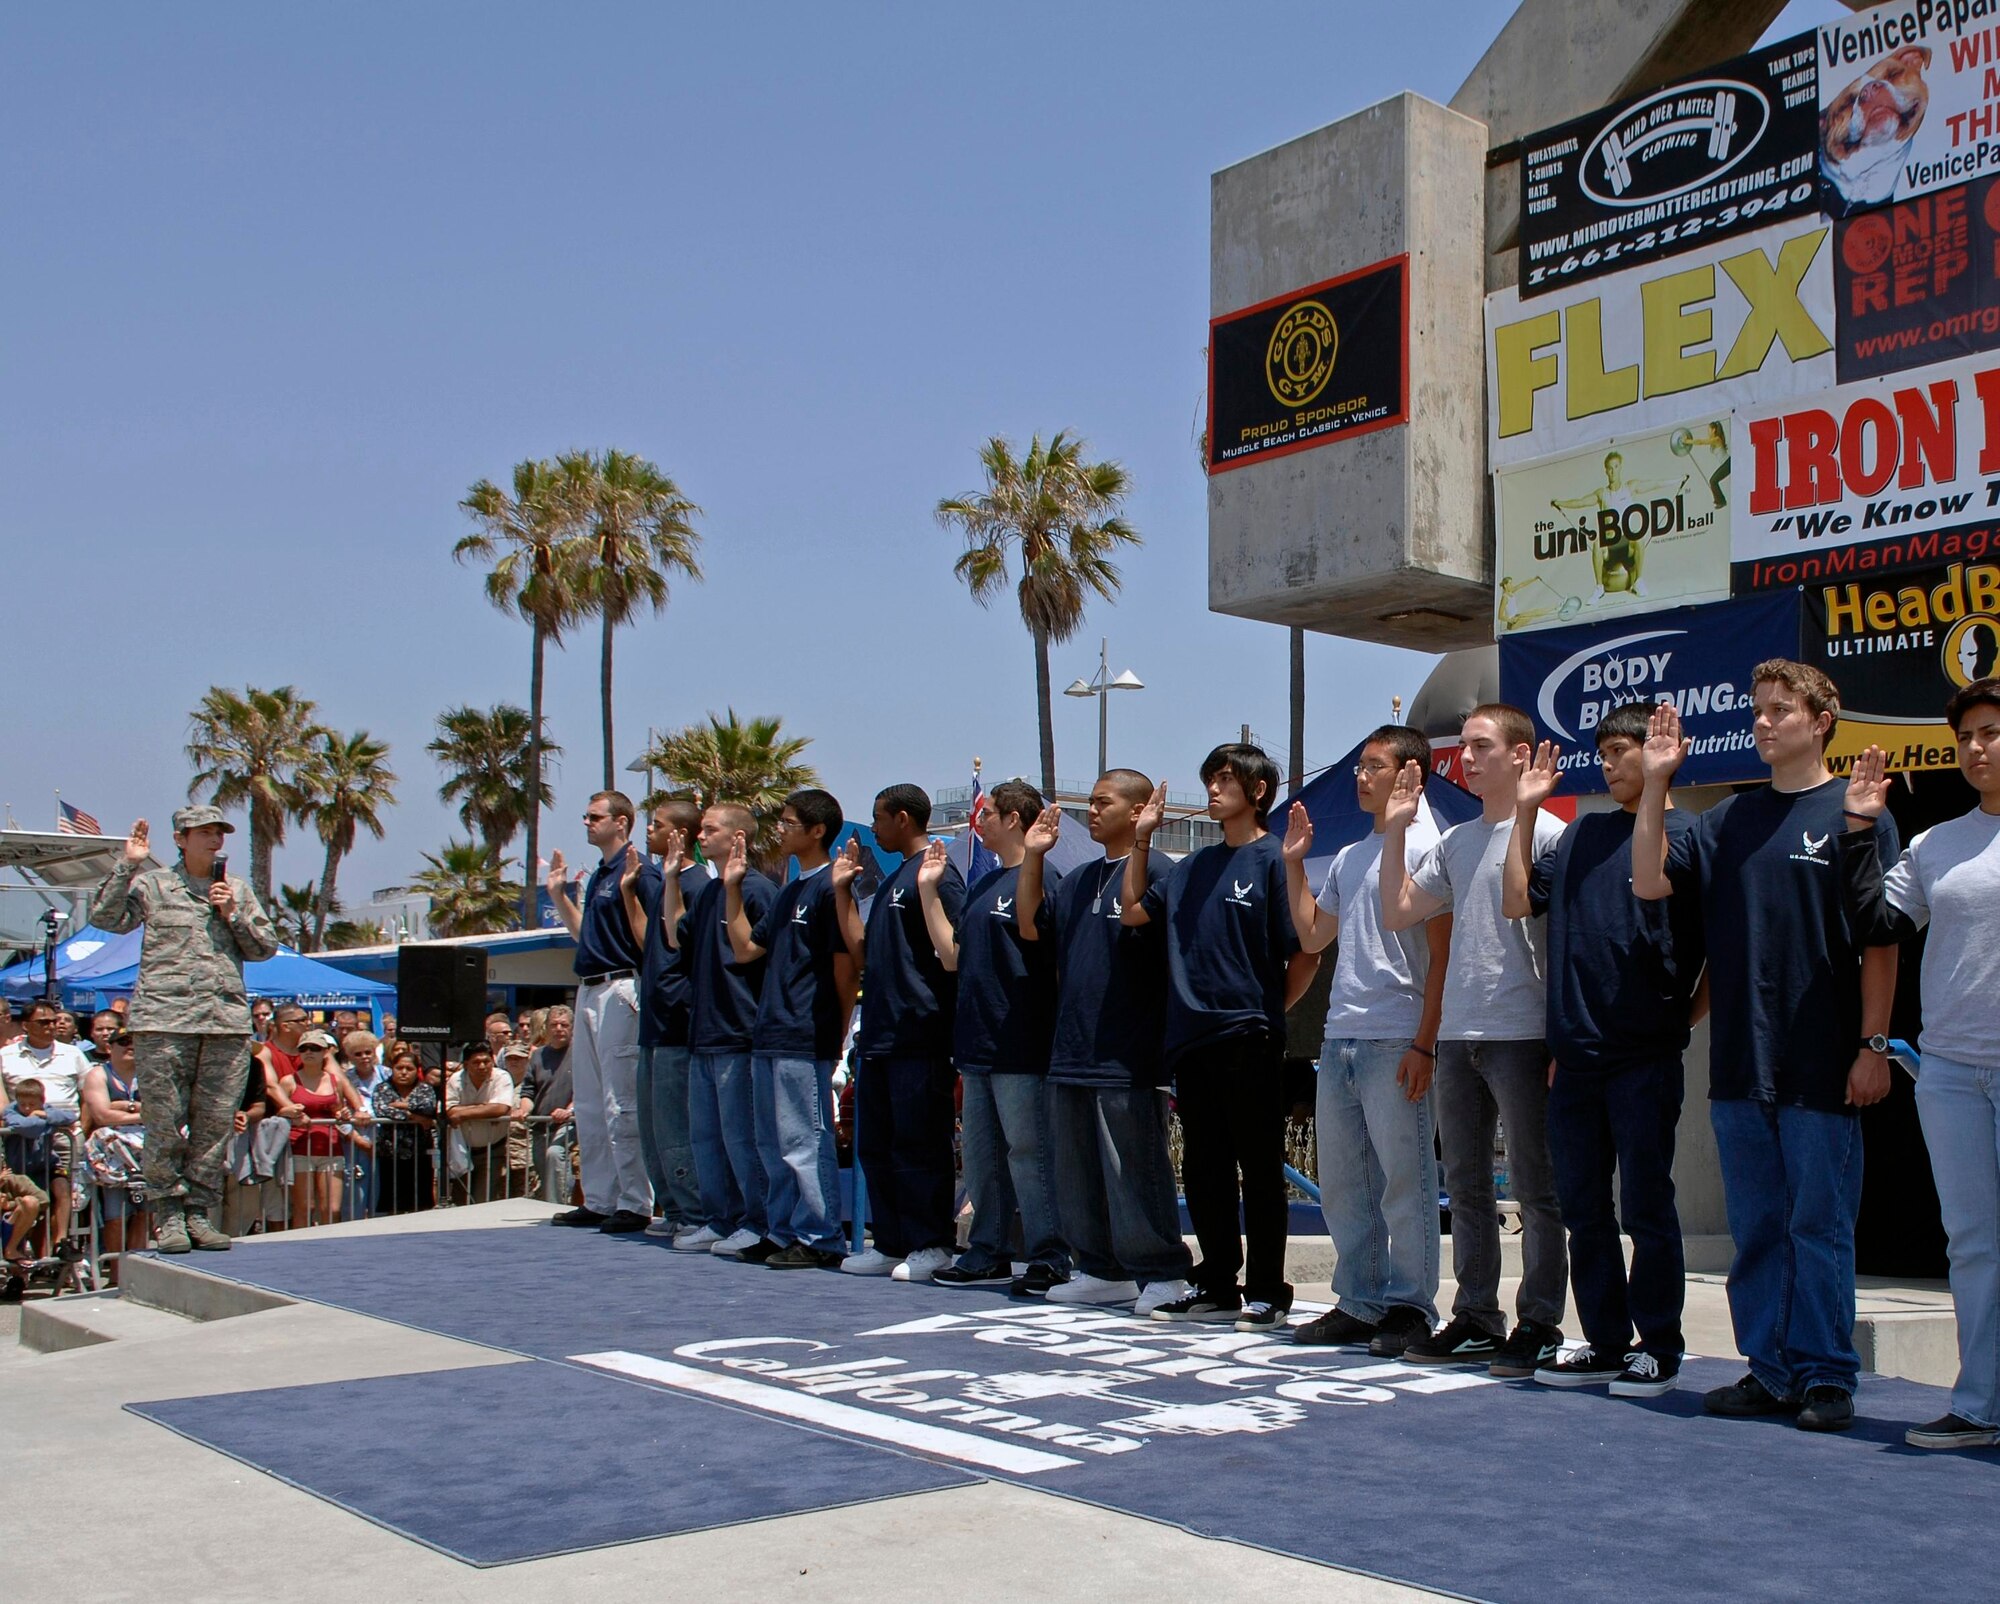 Brig. Gen. Ellen Pawlikowski, Military Satellite Systems Wing Commander, swears in new recruits at the Muscle Beach Memorial Day celebration in Venice, Calif., May 28